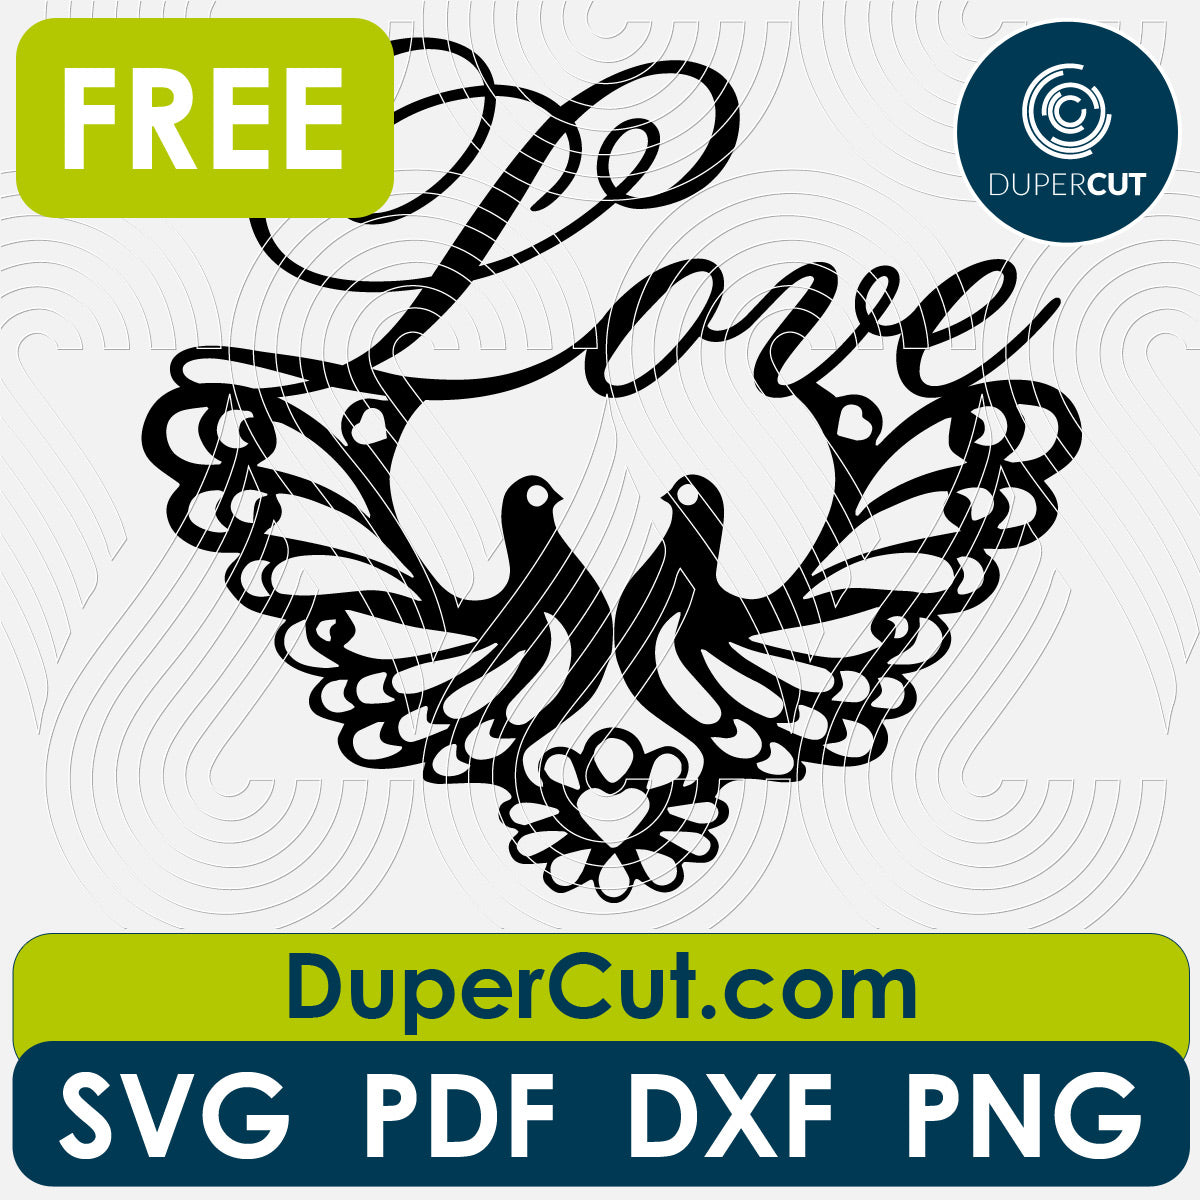 Doves Love couple wedding cake topper, FREE cutting template SVG PNG DXF files for Glowforge, Cricut, Silhouette, CNC laser router by DuperCut.com